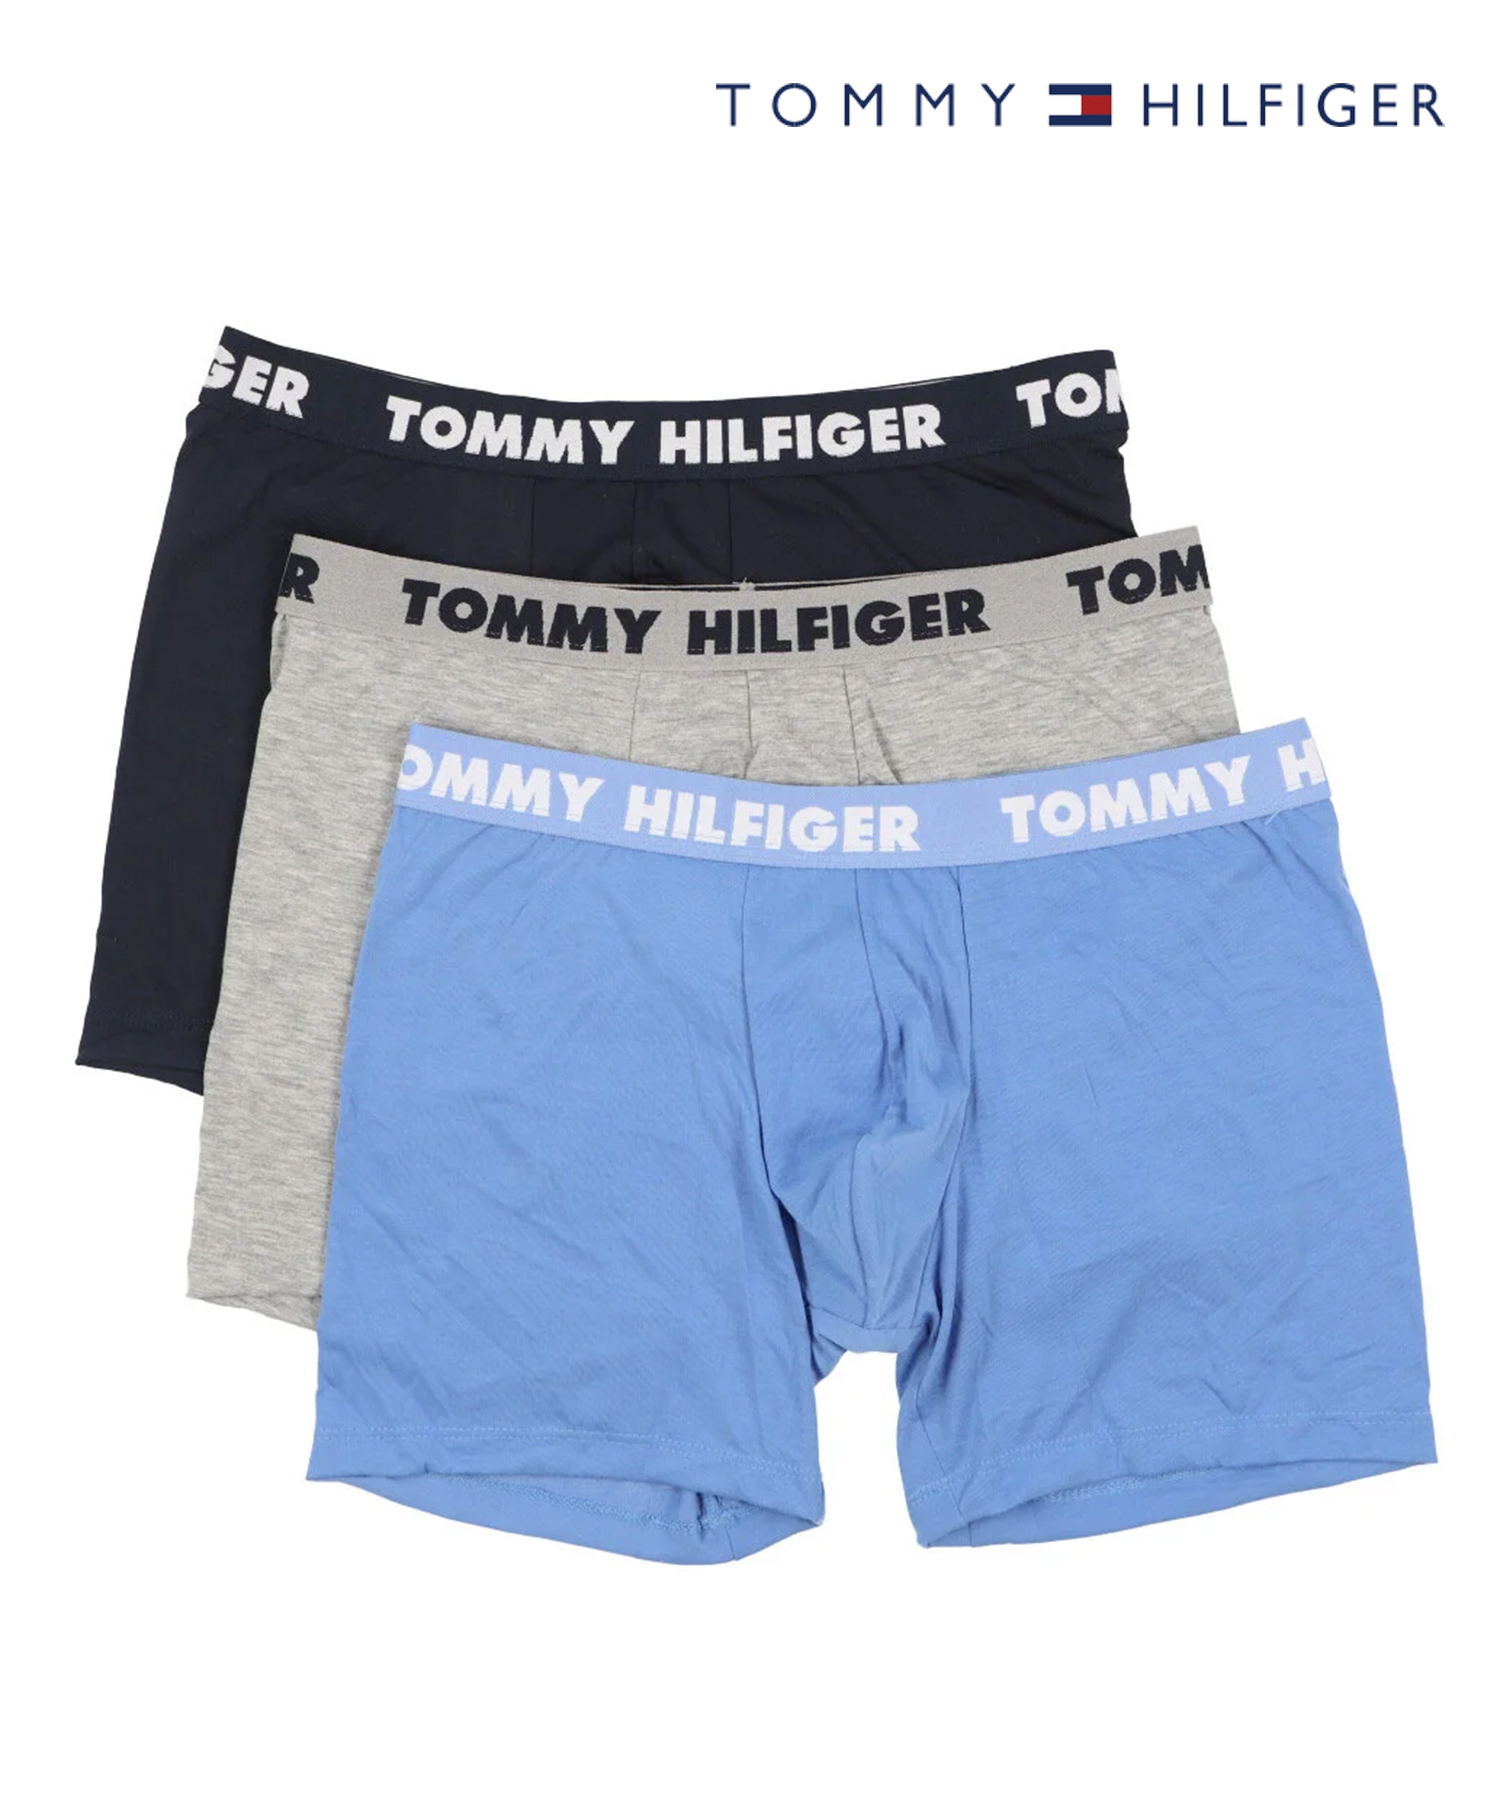 TOMMY HILFIGER / トミーヒルフィガー】ボクサーパンツ 3枚セット 09T3737 3PK ギフト プレゼント  贈り物(505489391) | トミーヒルフィガー(TOMMY HILFIGER) - MAGASEEK